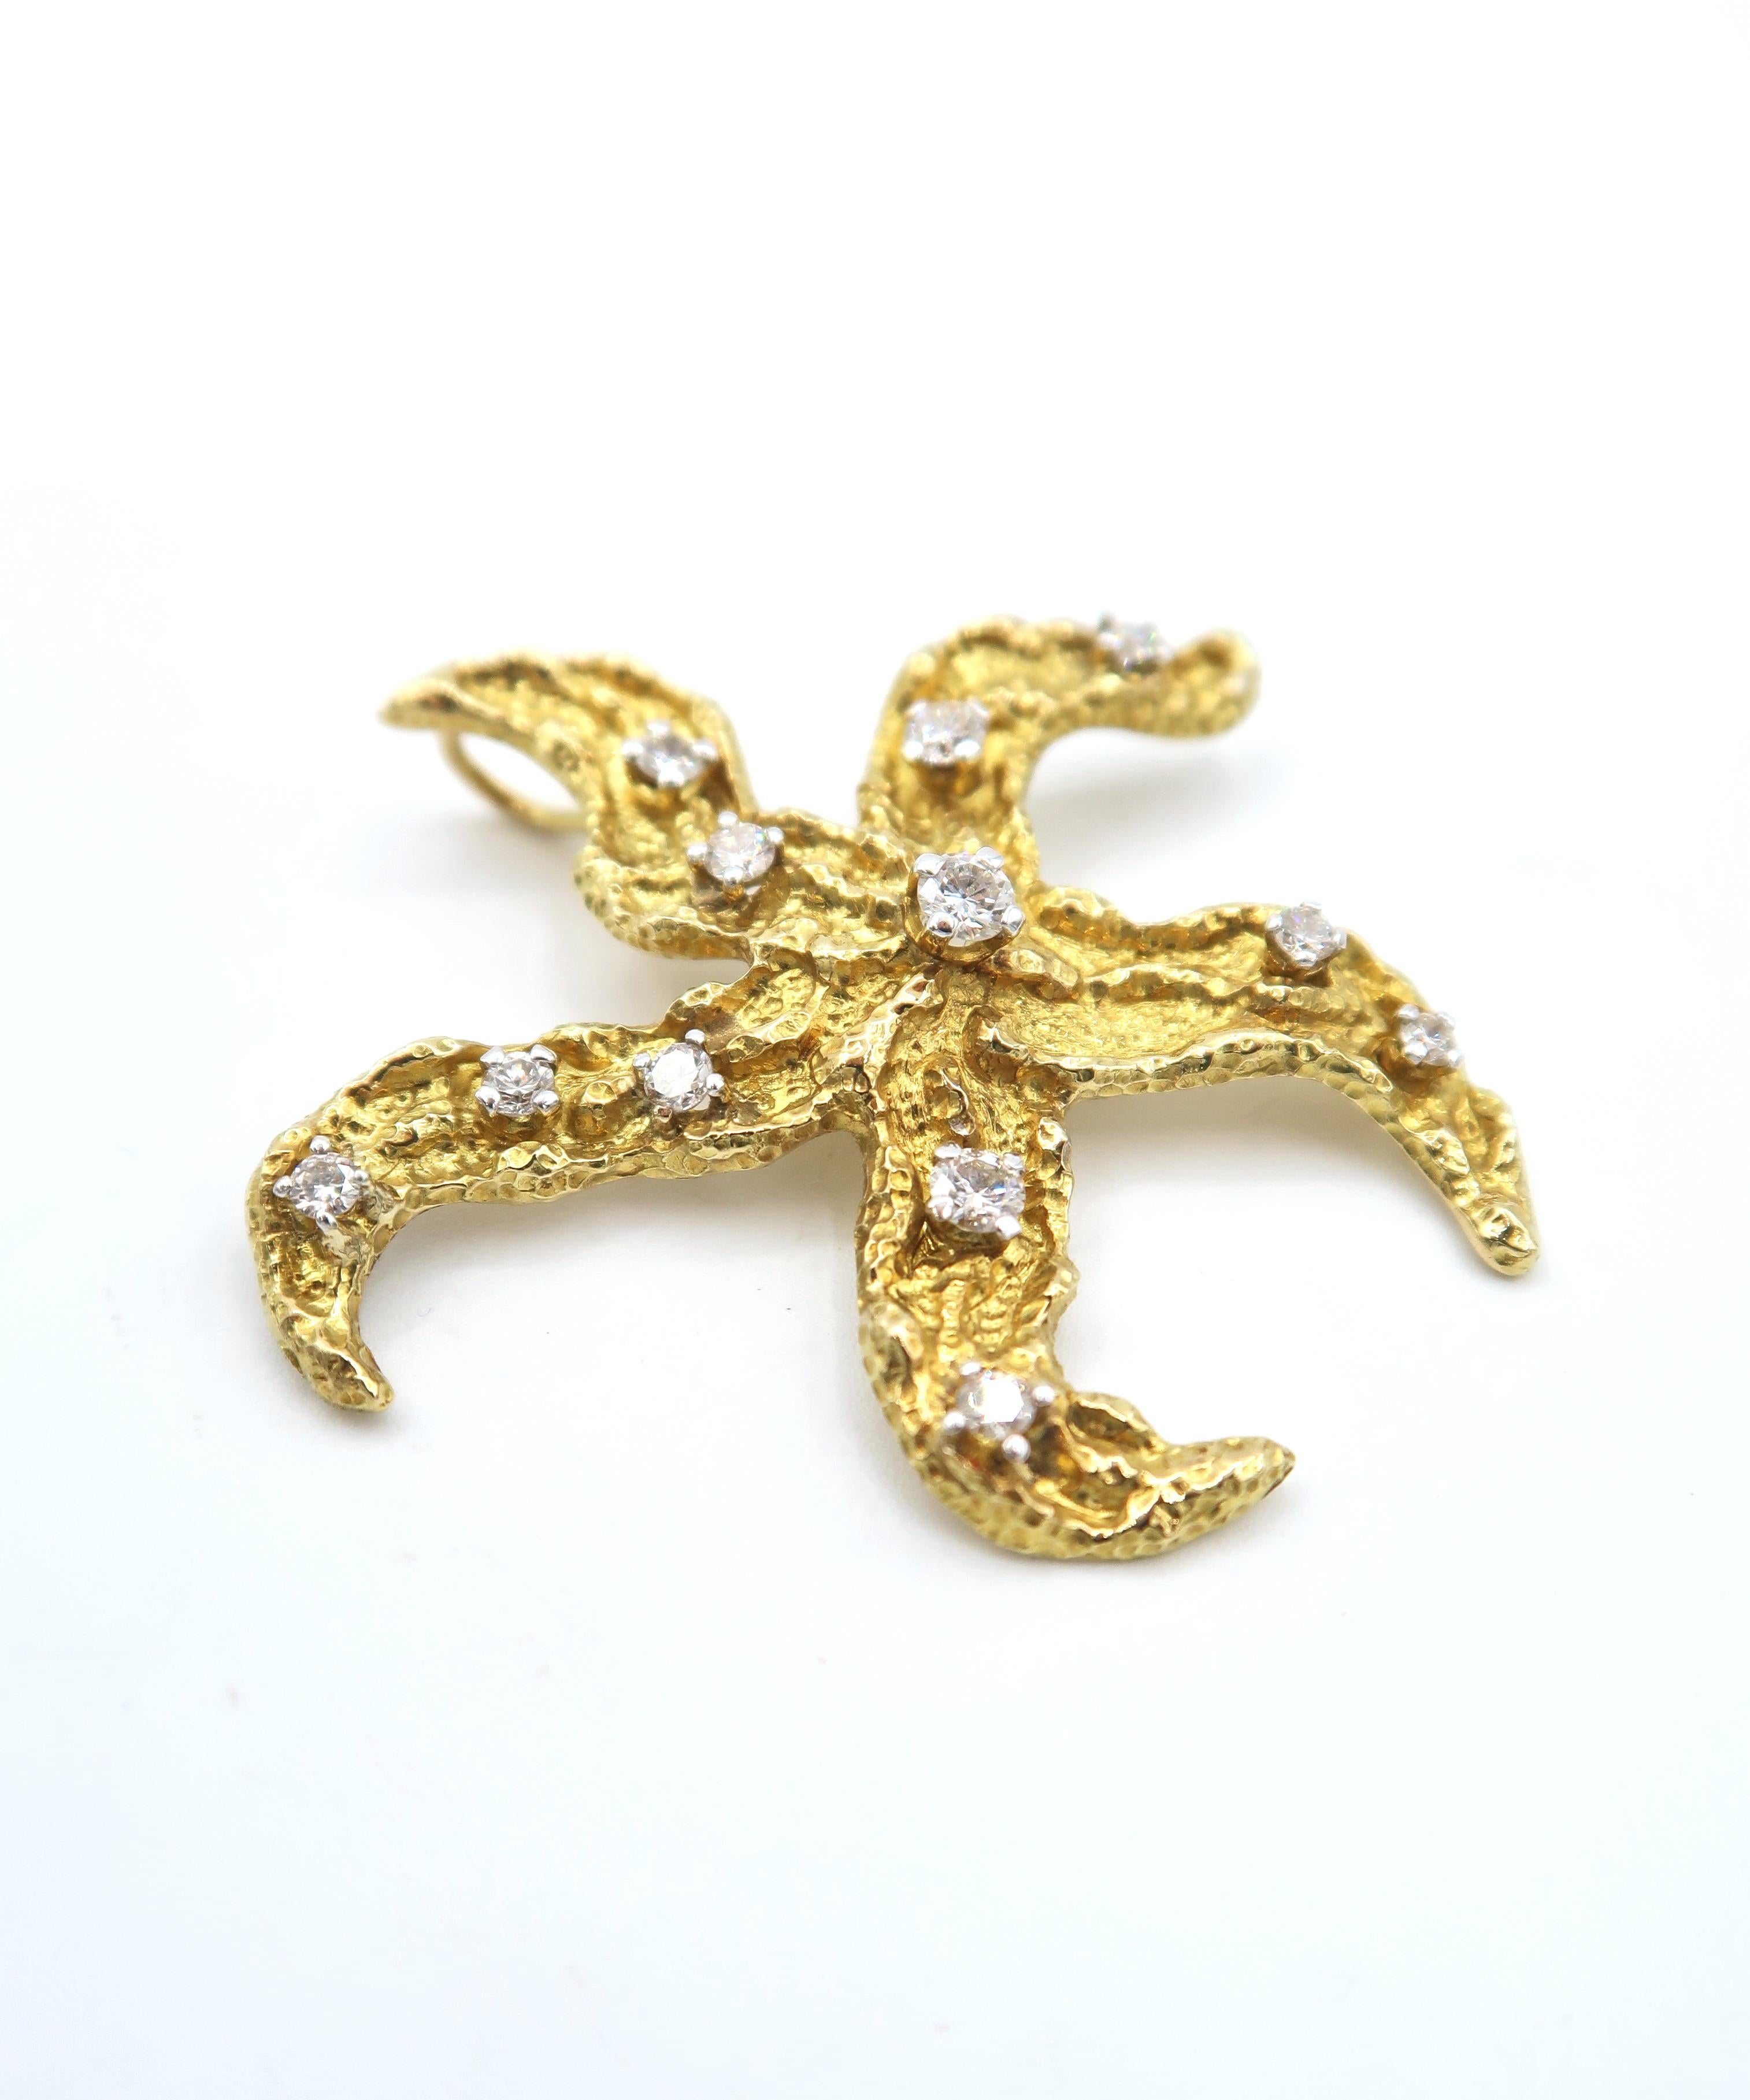 Starfish Diamond Brooch and Pendant in 18K Yellow Gold

Please note that this brooch/pendant does not come with a chain.

Diamond : 0.71ct.
Gold : 18K Gold 11.20g.